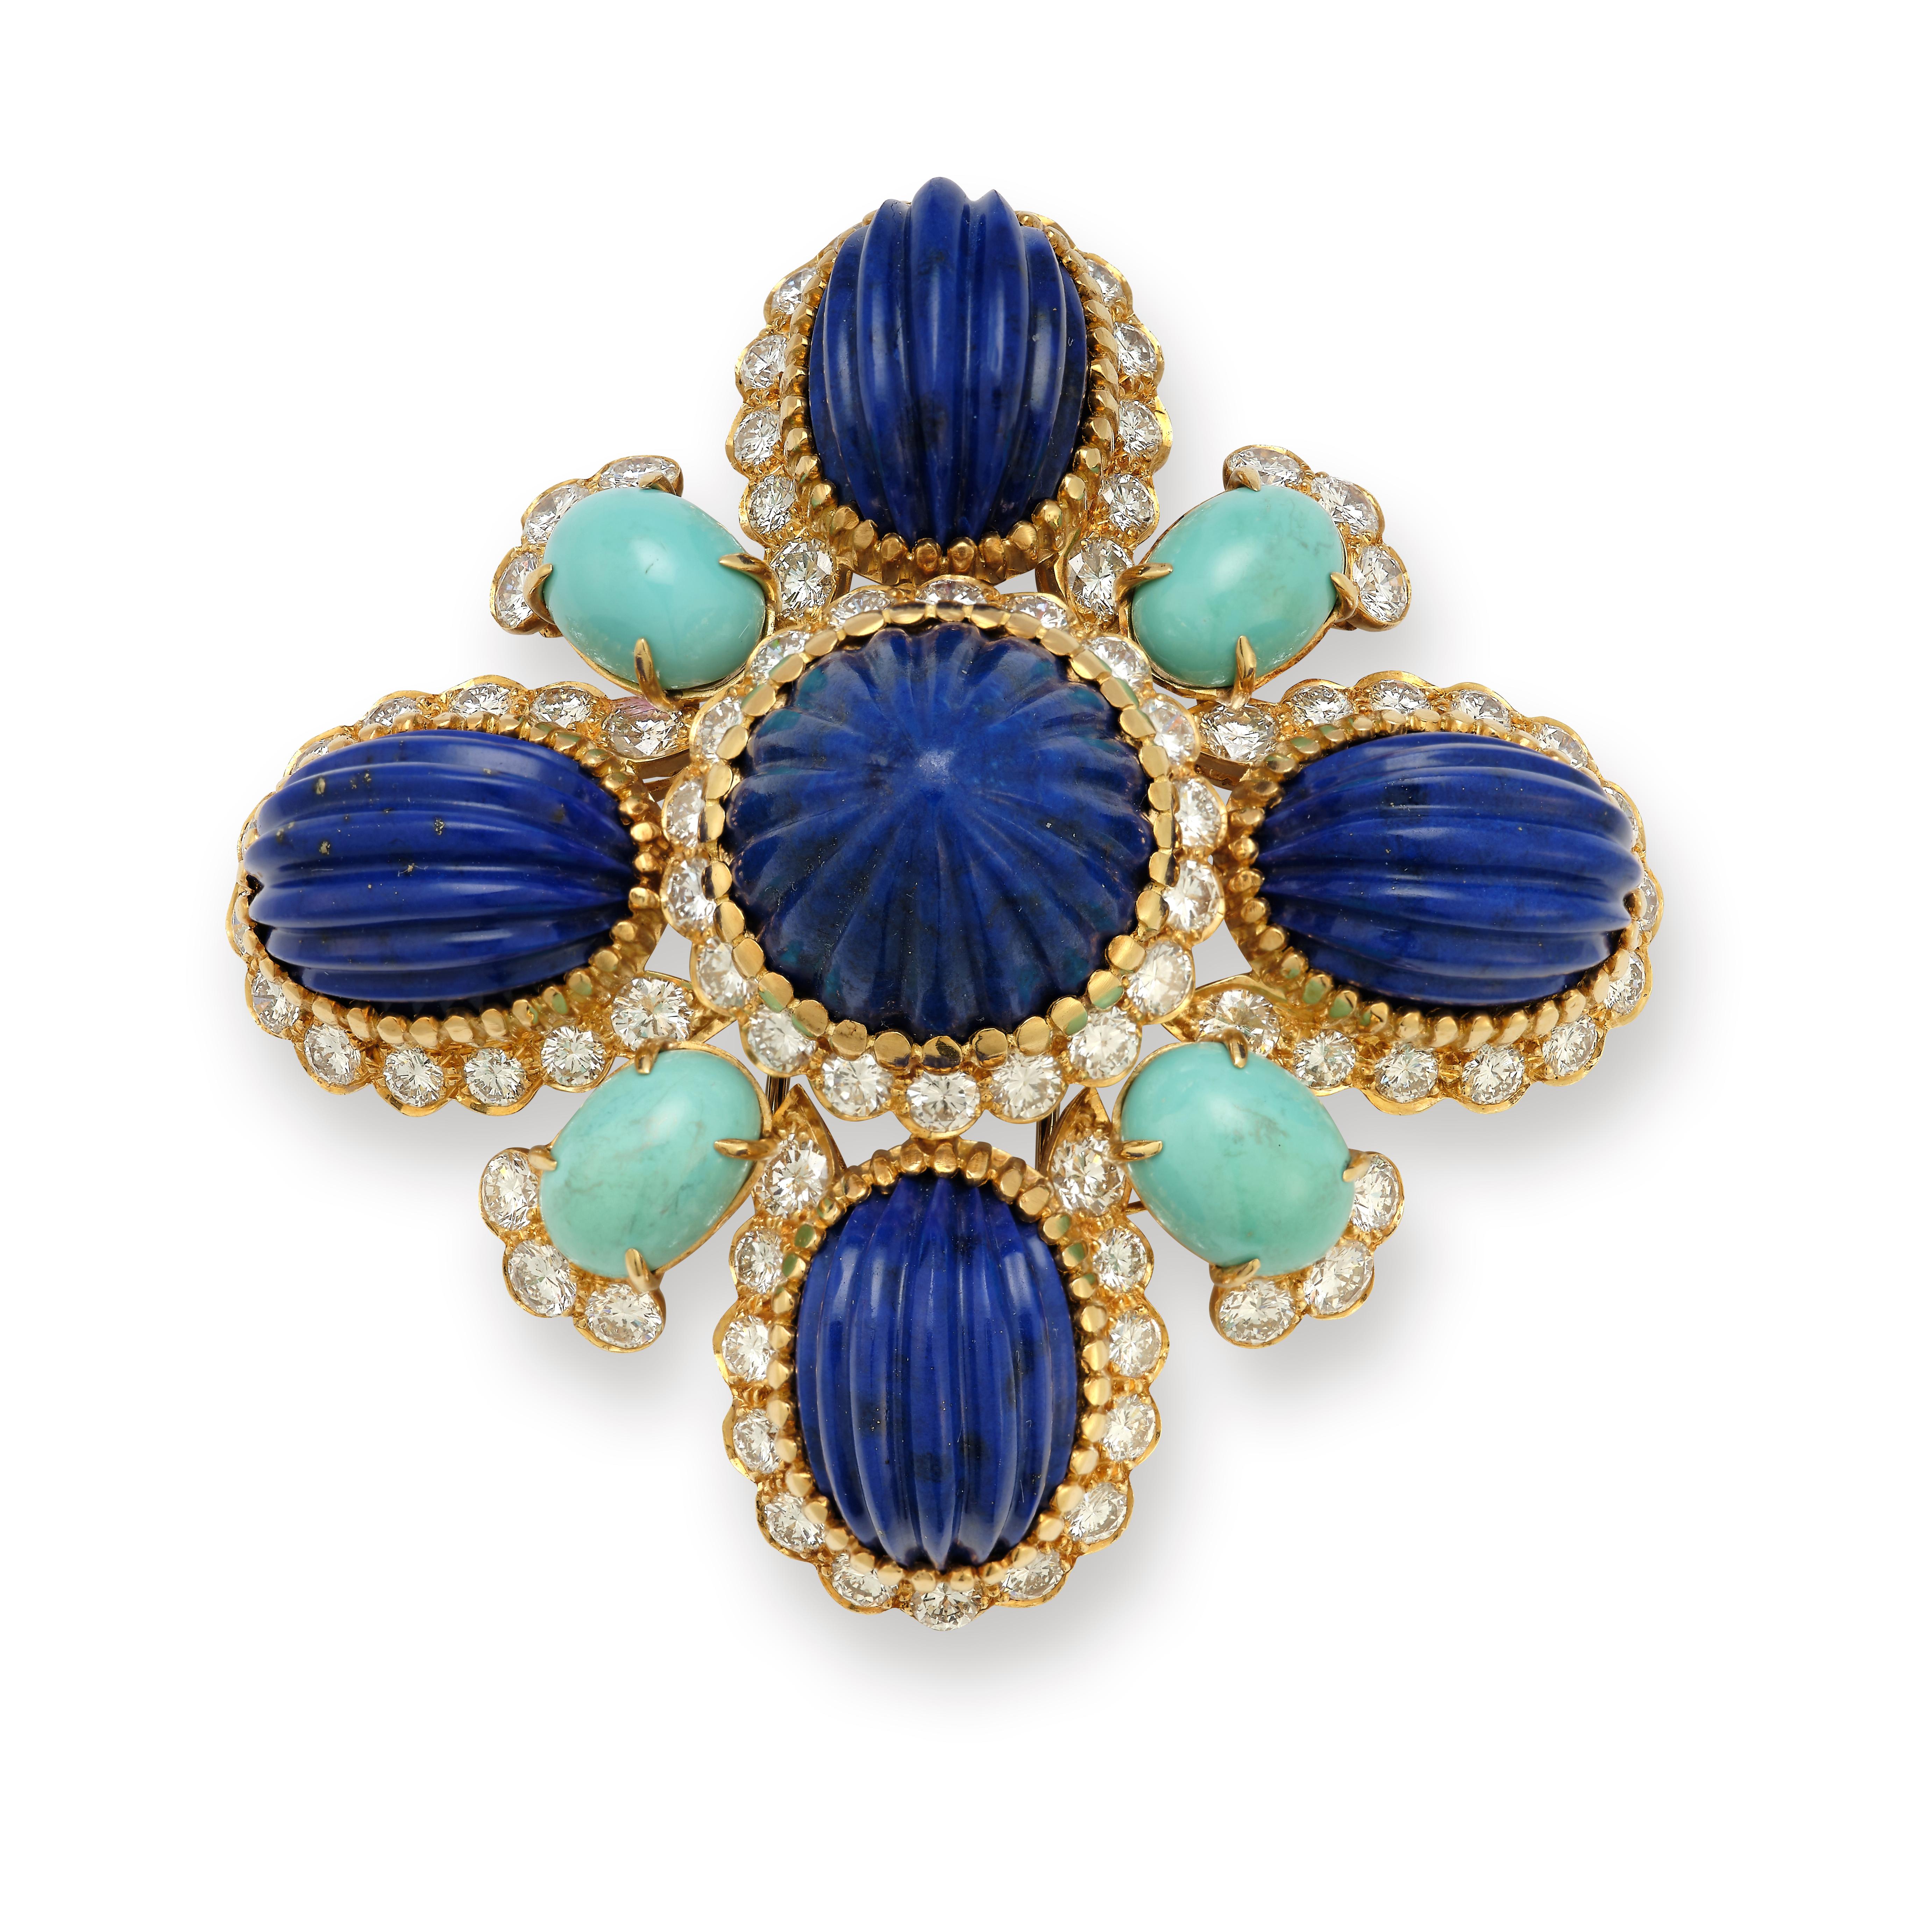 Van Cleef Lapis Lazuli & Turquoise Brooch 

Carved lapis lazuli and turquoise set with diamonds

18k yellow gold

Signed Van Cleef and Arpels and numbered

Measurements: 2.5